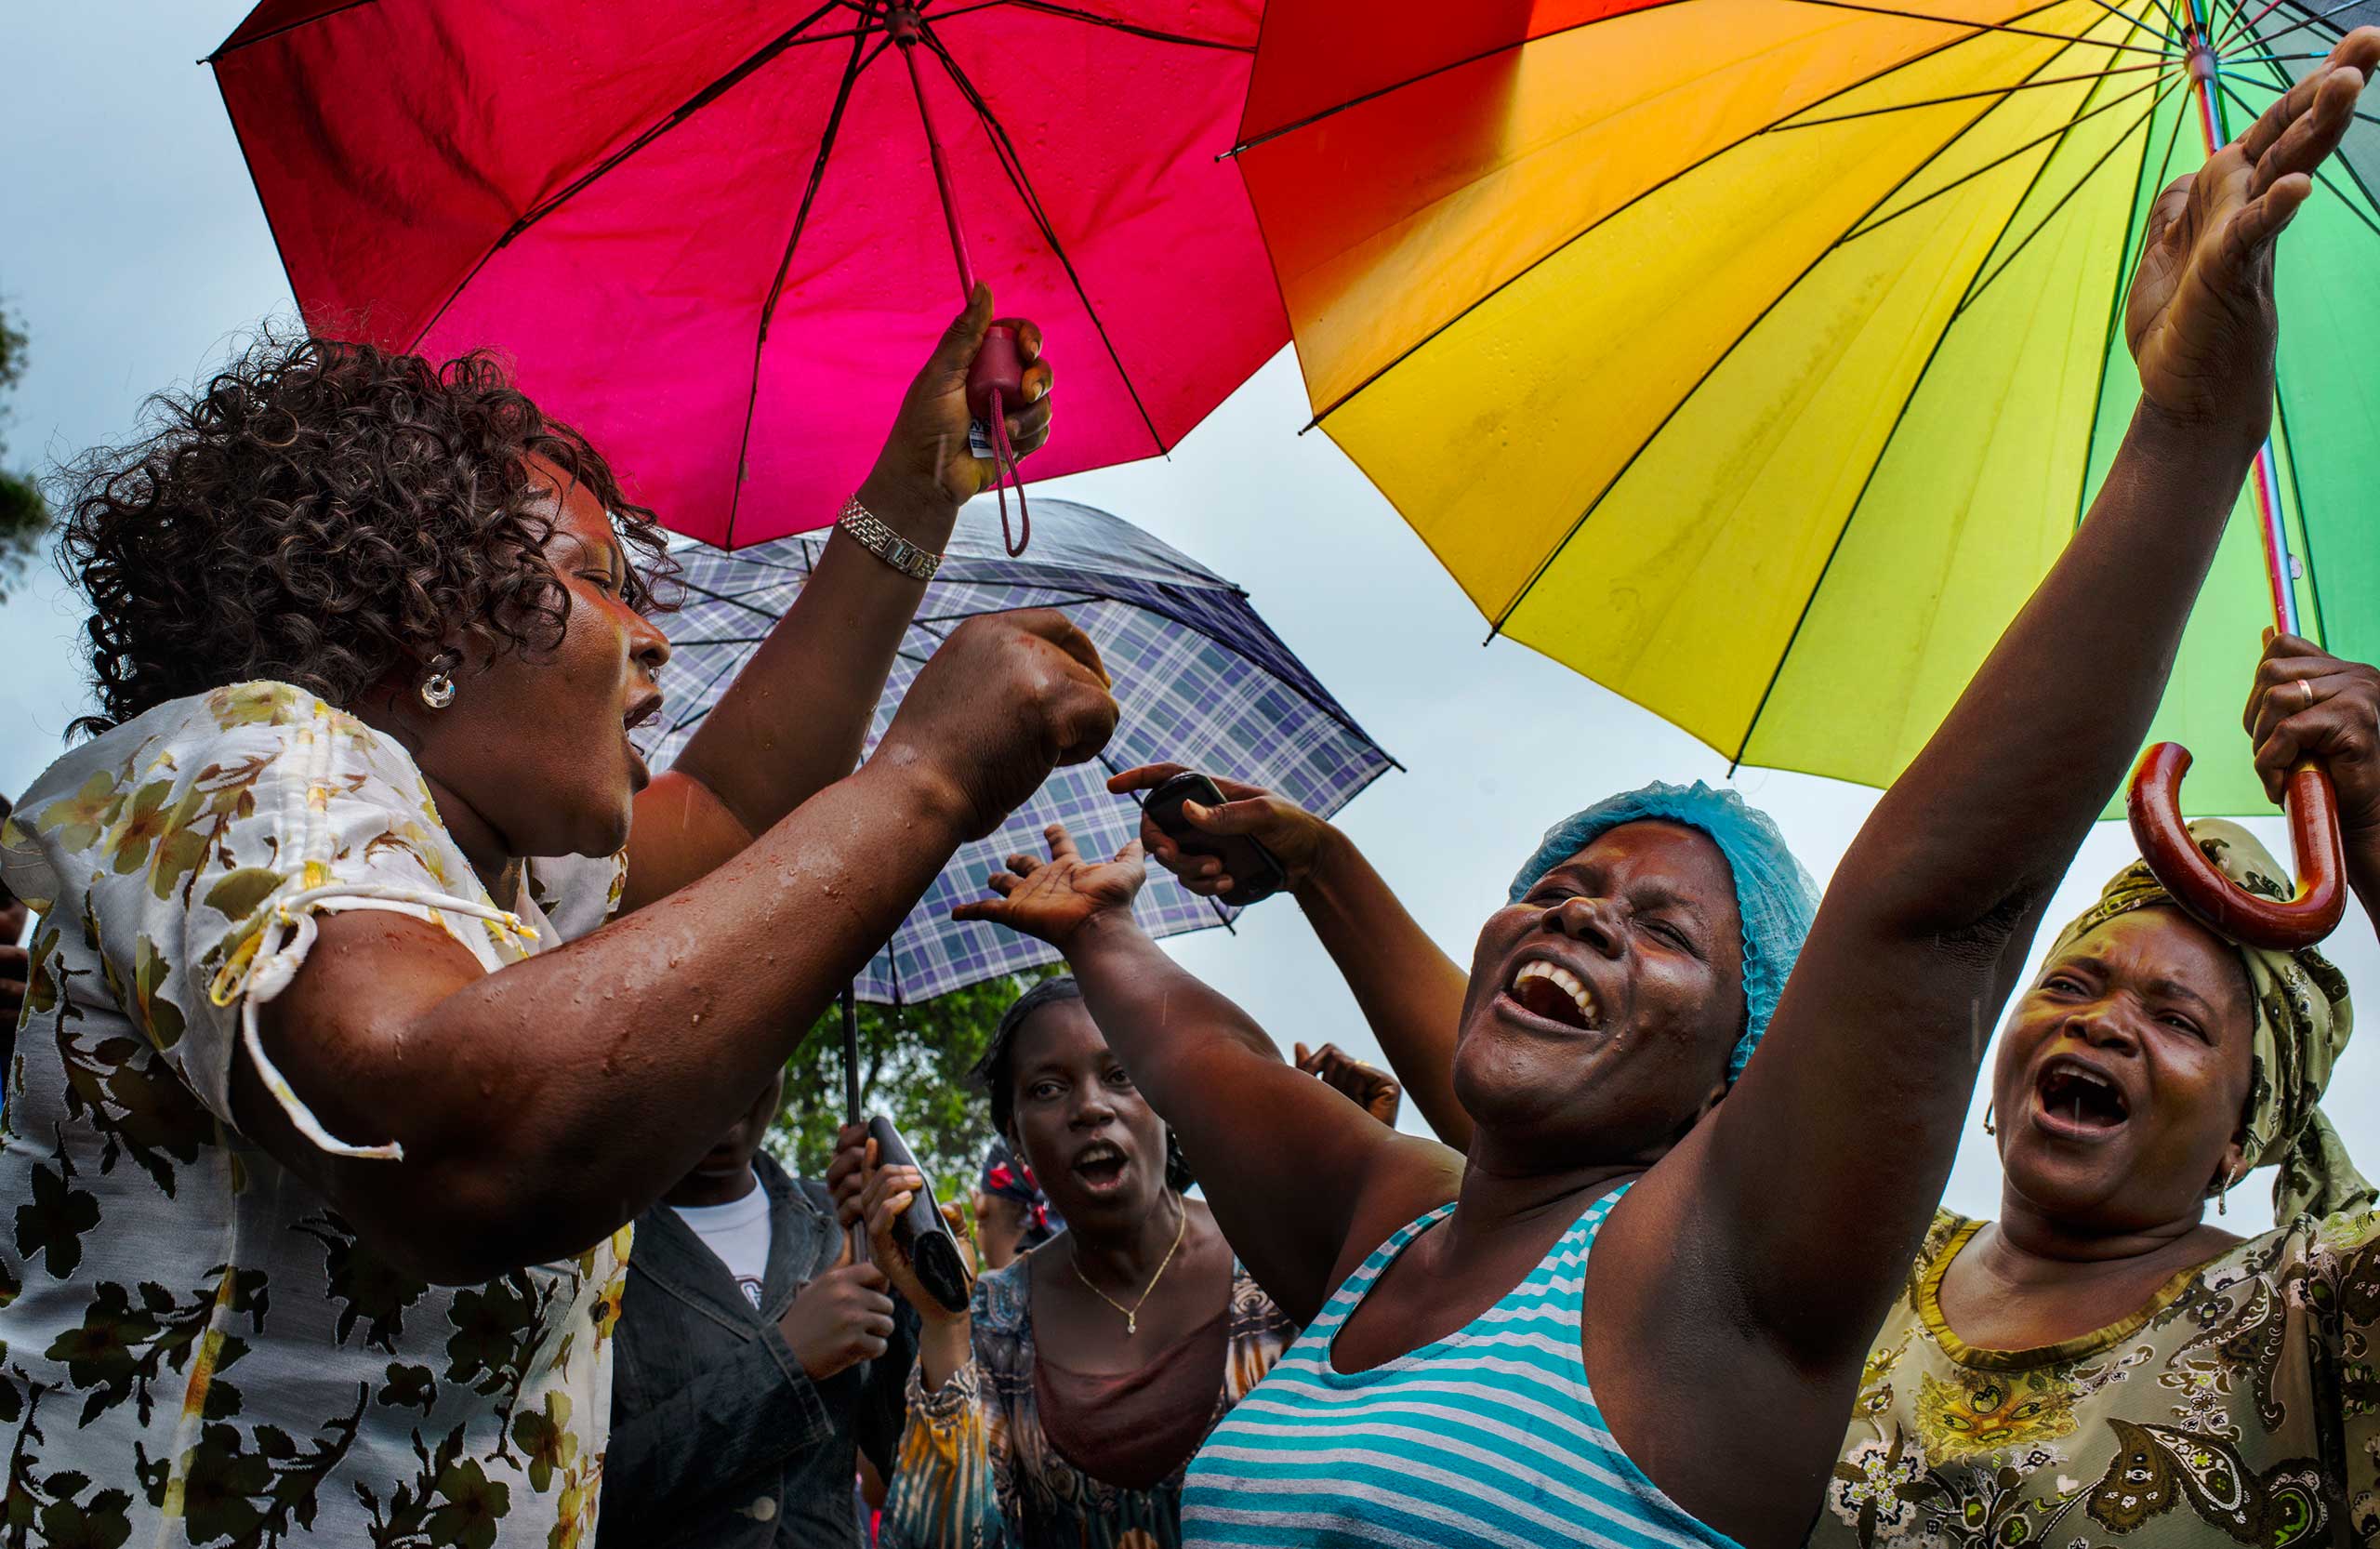 The New York Times Lens: Michel du Cille: A Photographer With Compassion and RespectKlubo Mulbah, a nurse who was infected with Ebola celebrates her recovery, Sept. 24, 2014 in Monrovia, Liberia.